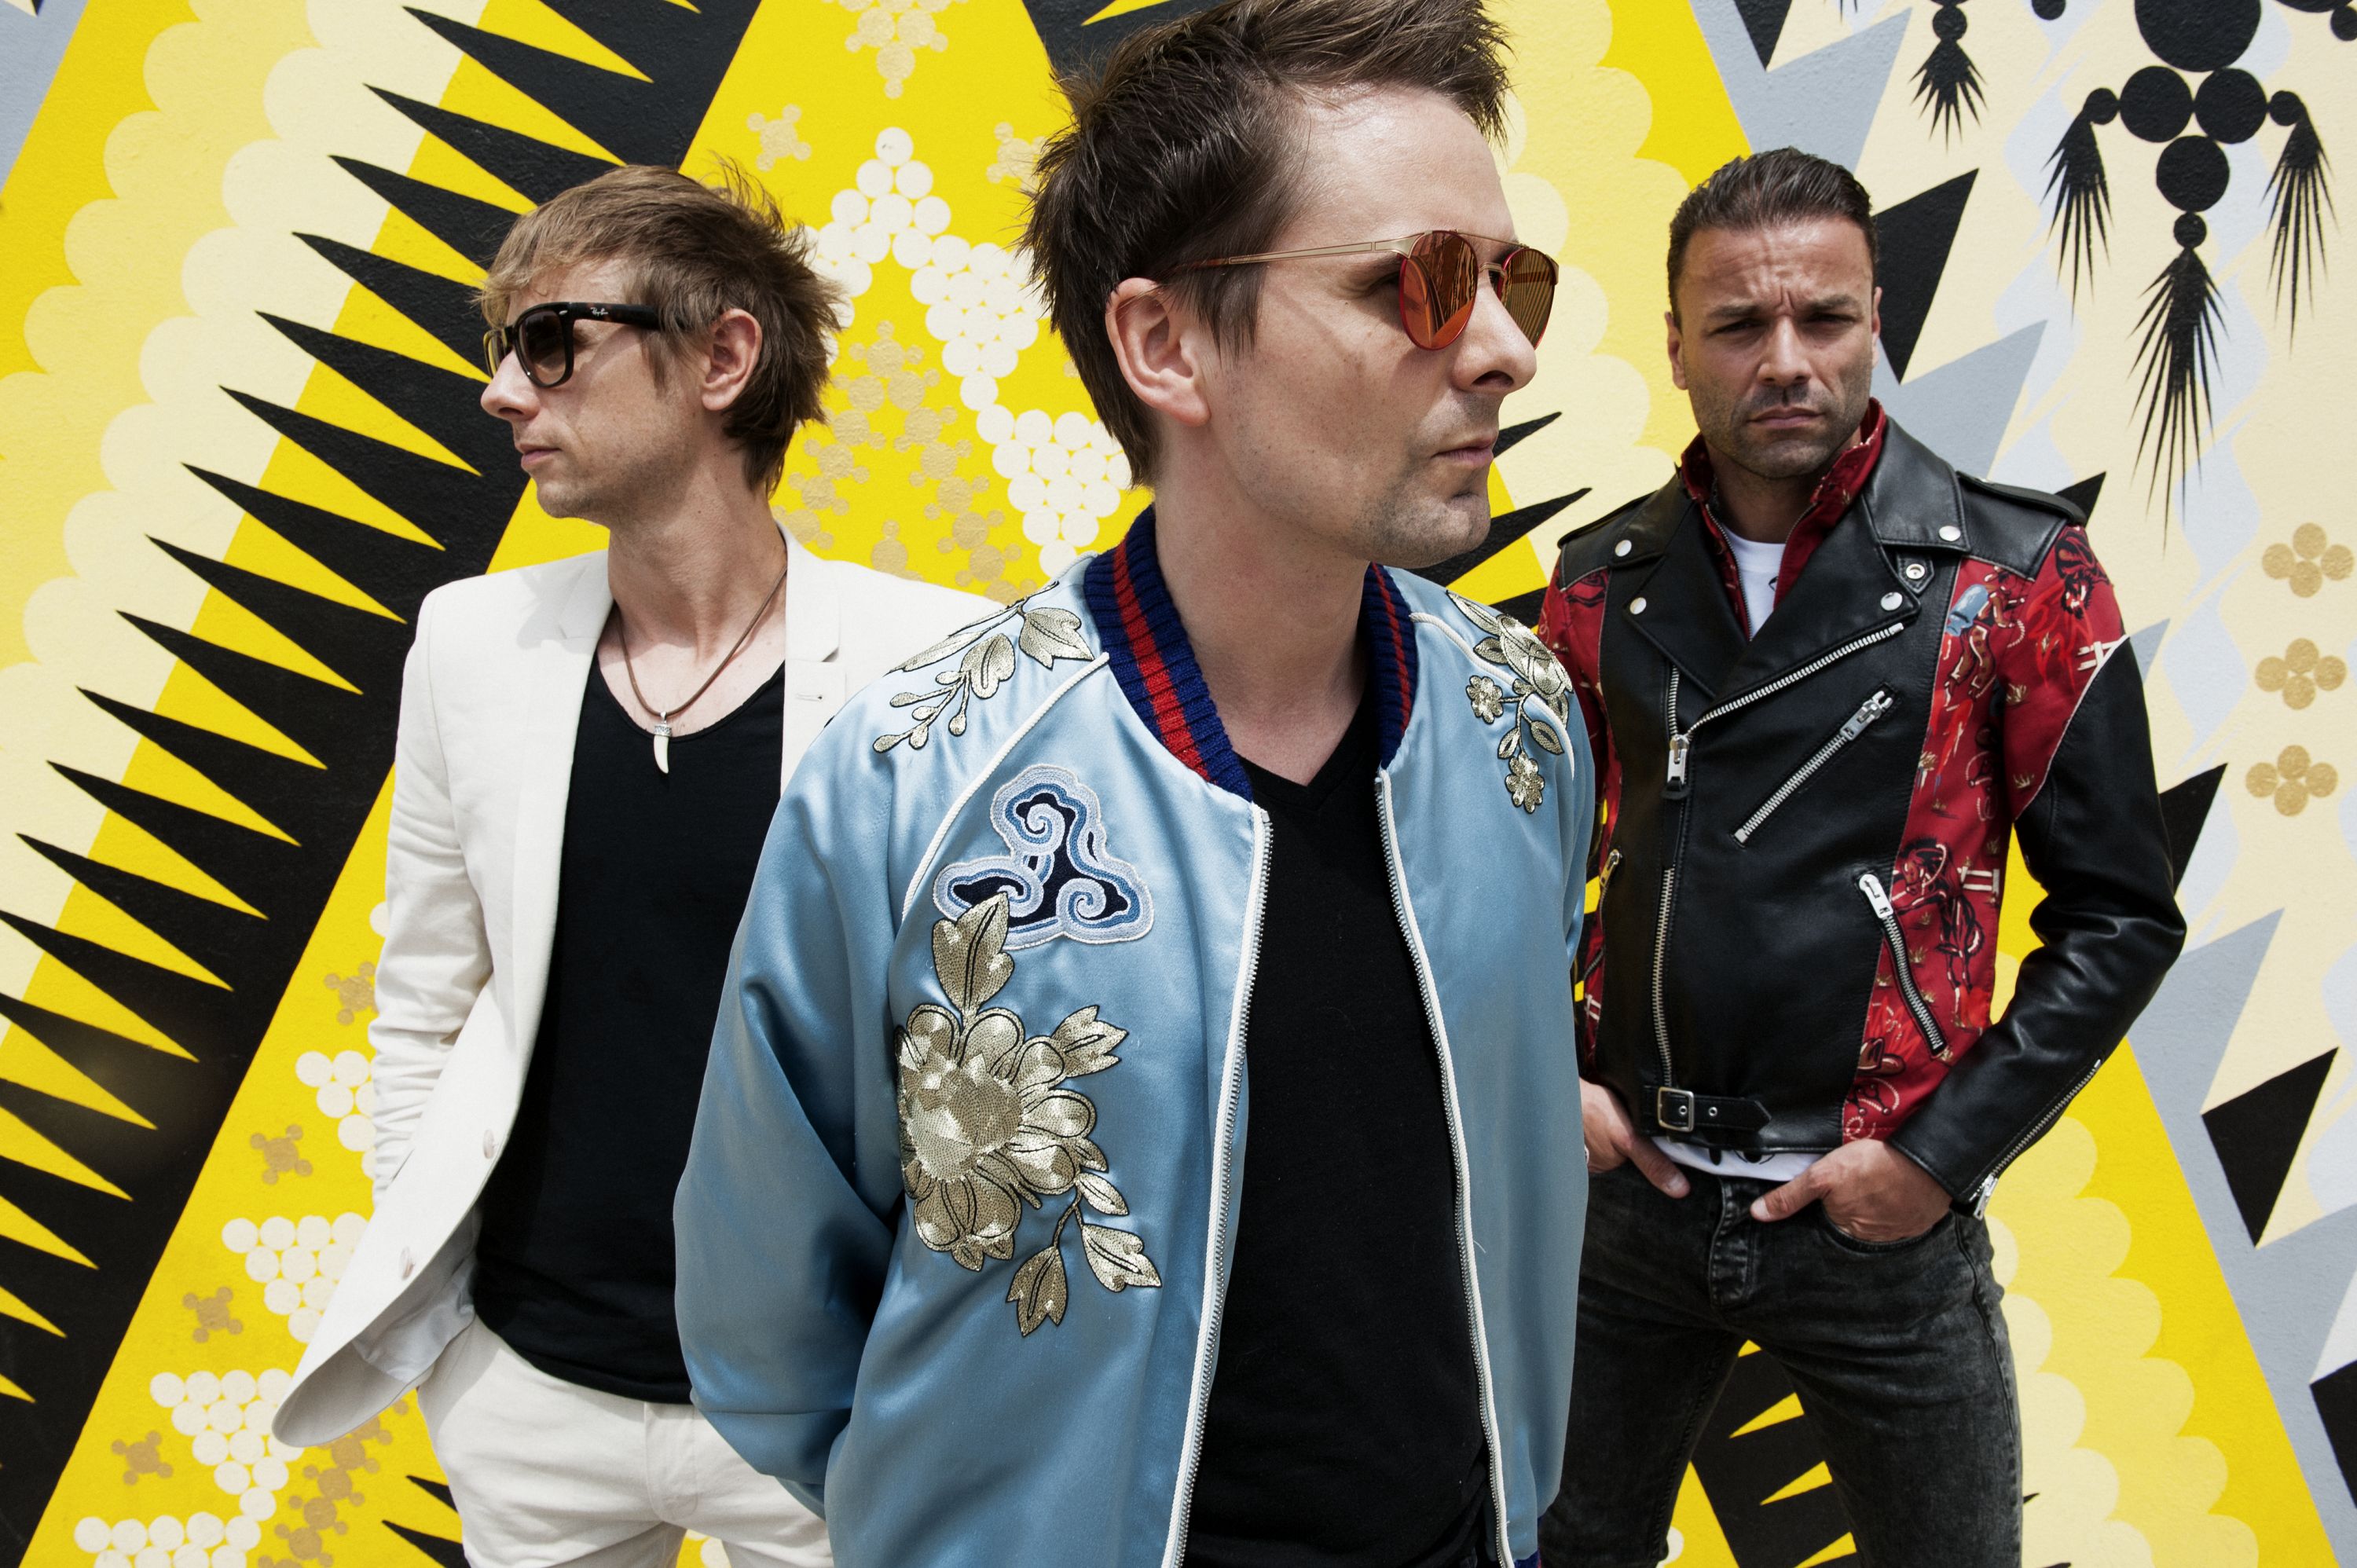 Muse Announce Special SummerStage, Central Park Concert On July 24, 2017 -- Concert To Benefit The Coalition For The Homeless